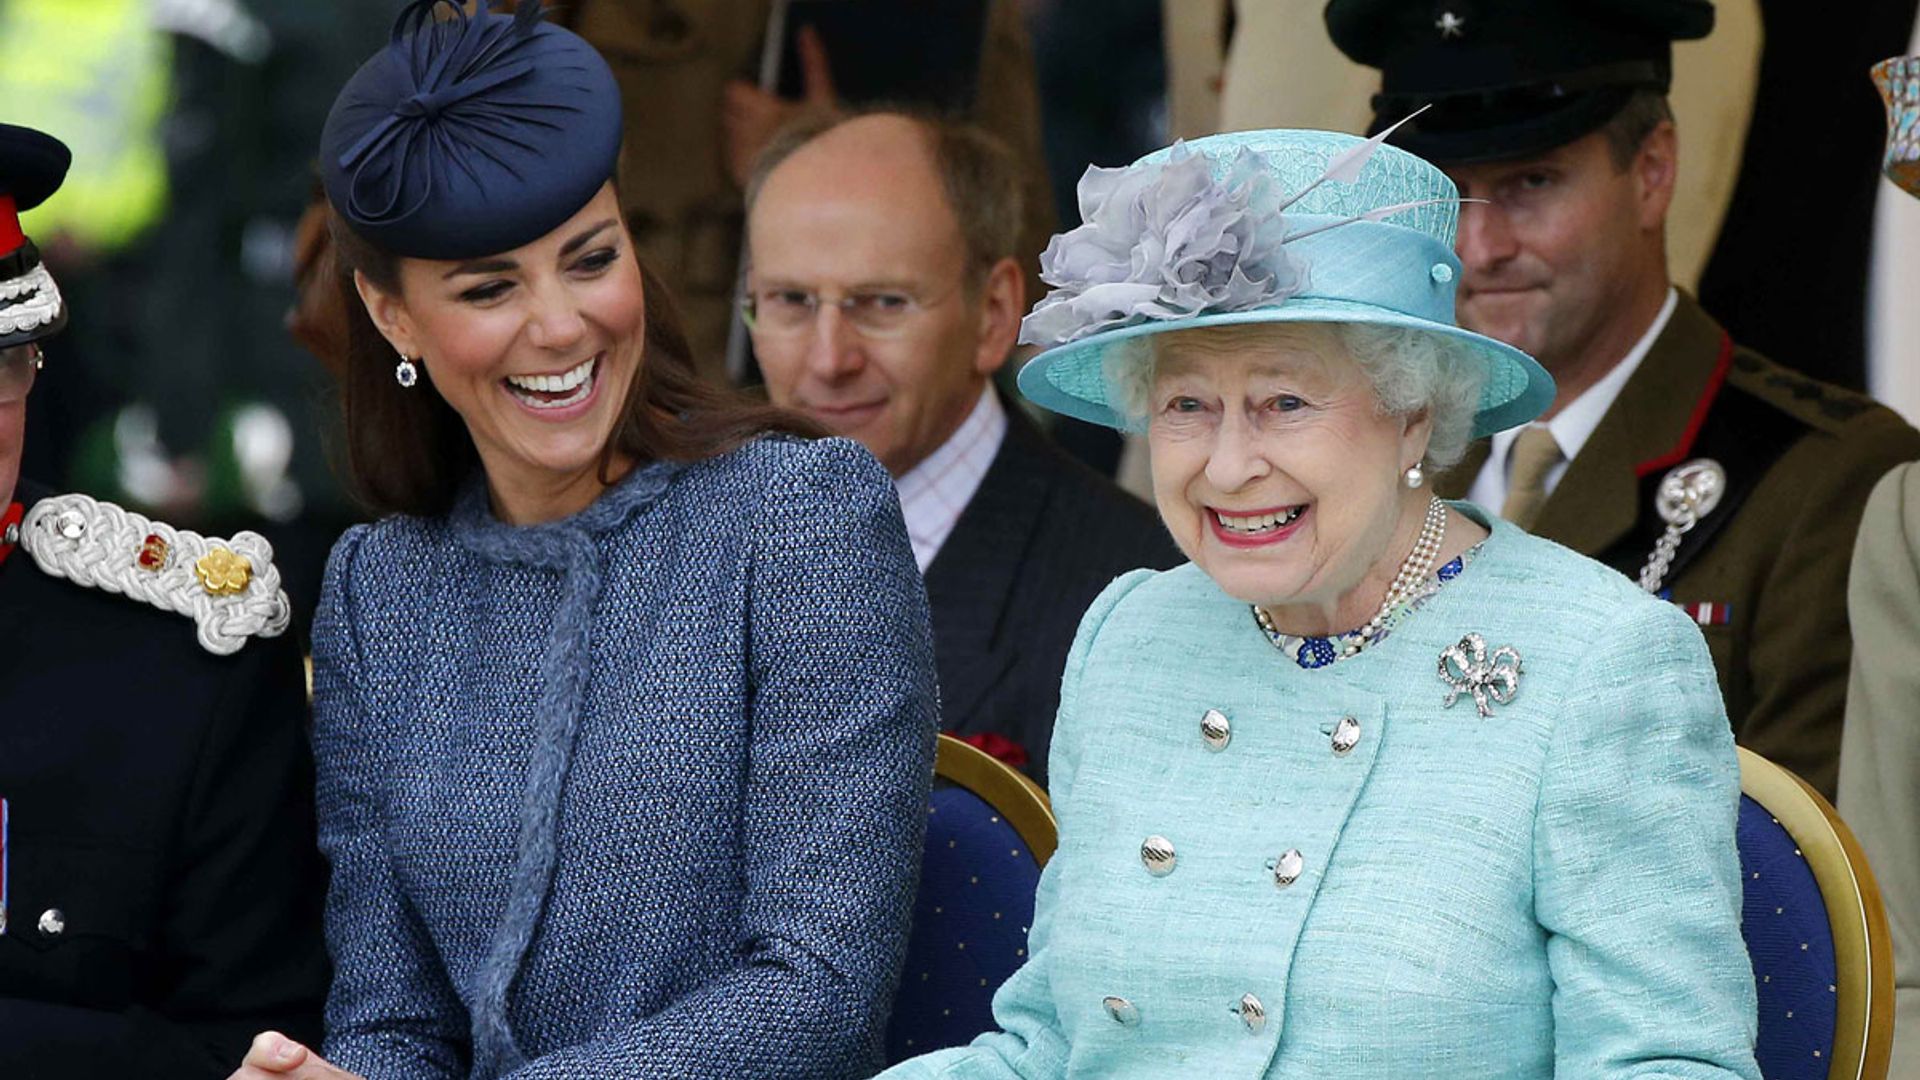 Kate Middleton and the Queen laughing